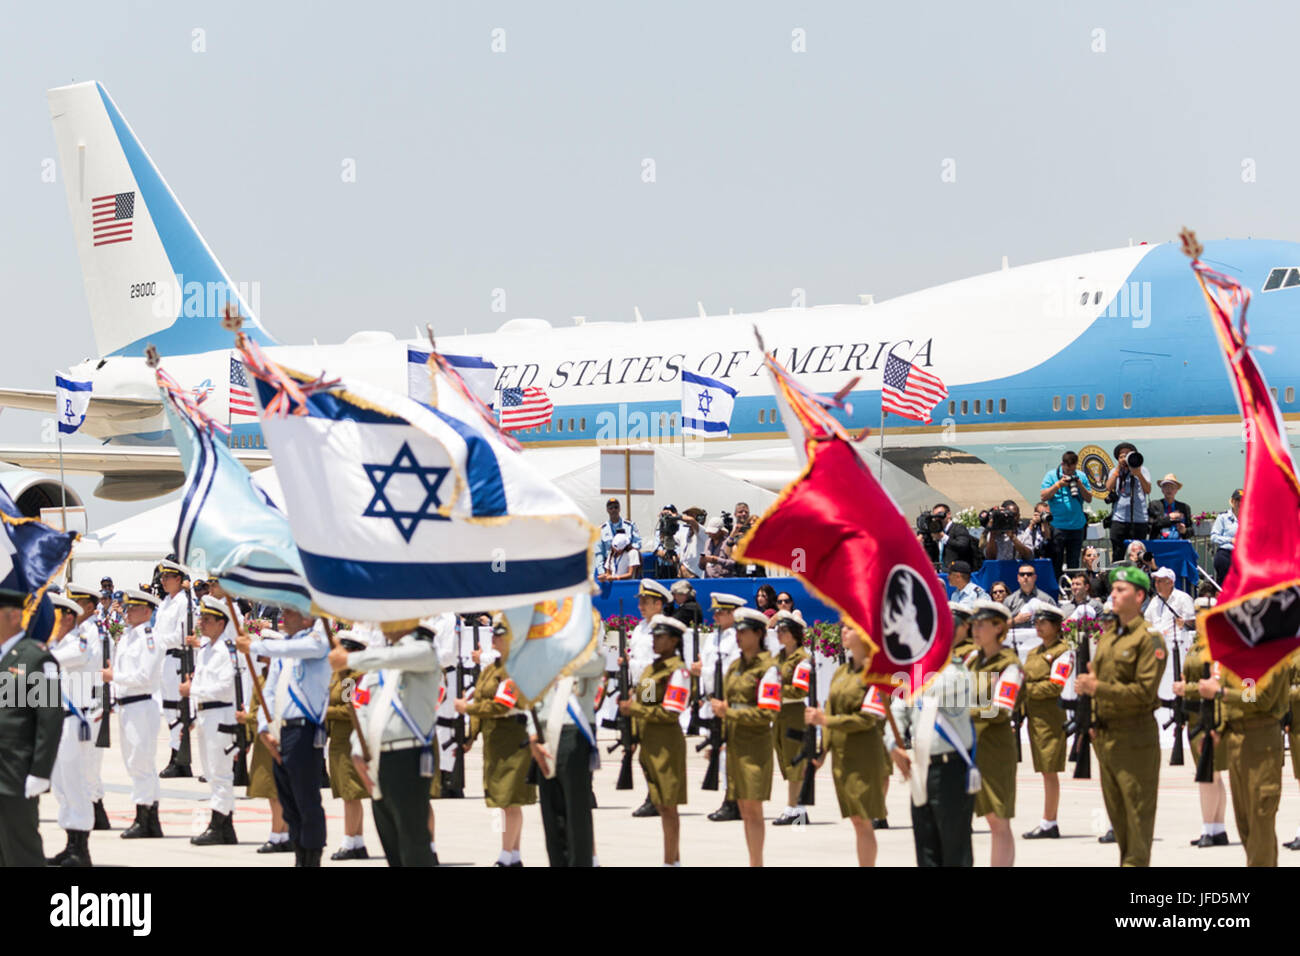 An Israeli Honor Guard and band are seen at the ceremony welcoming President Donald Trump and First Lady Melania Trump, Monday, May 22, 2017, at Ben Gurion Airport in Tel Aviv, Israel. (Official White House Photo by Shealah Craighead) Stock Photo